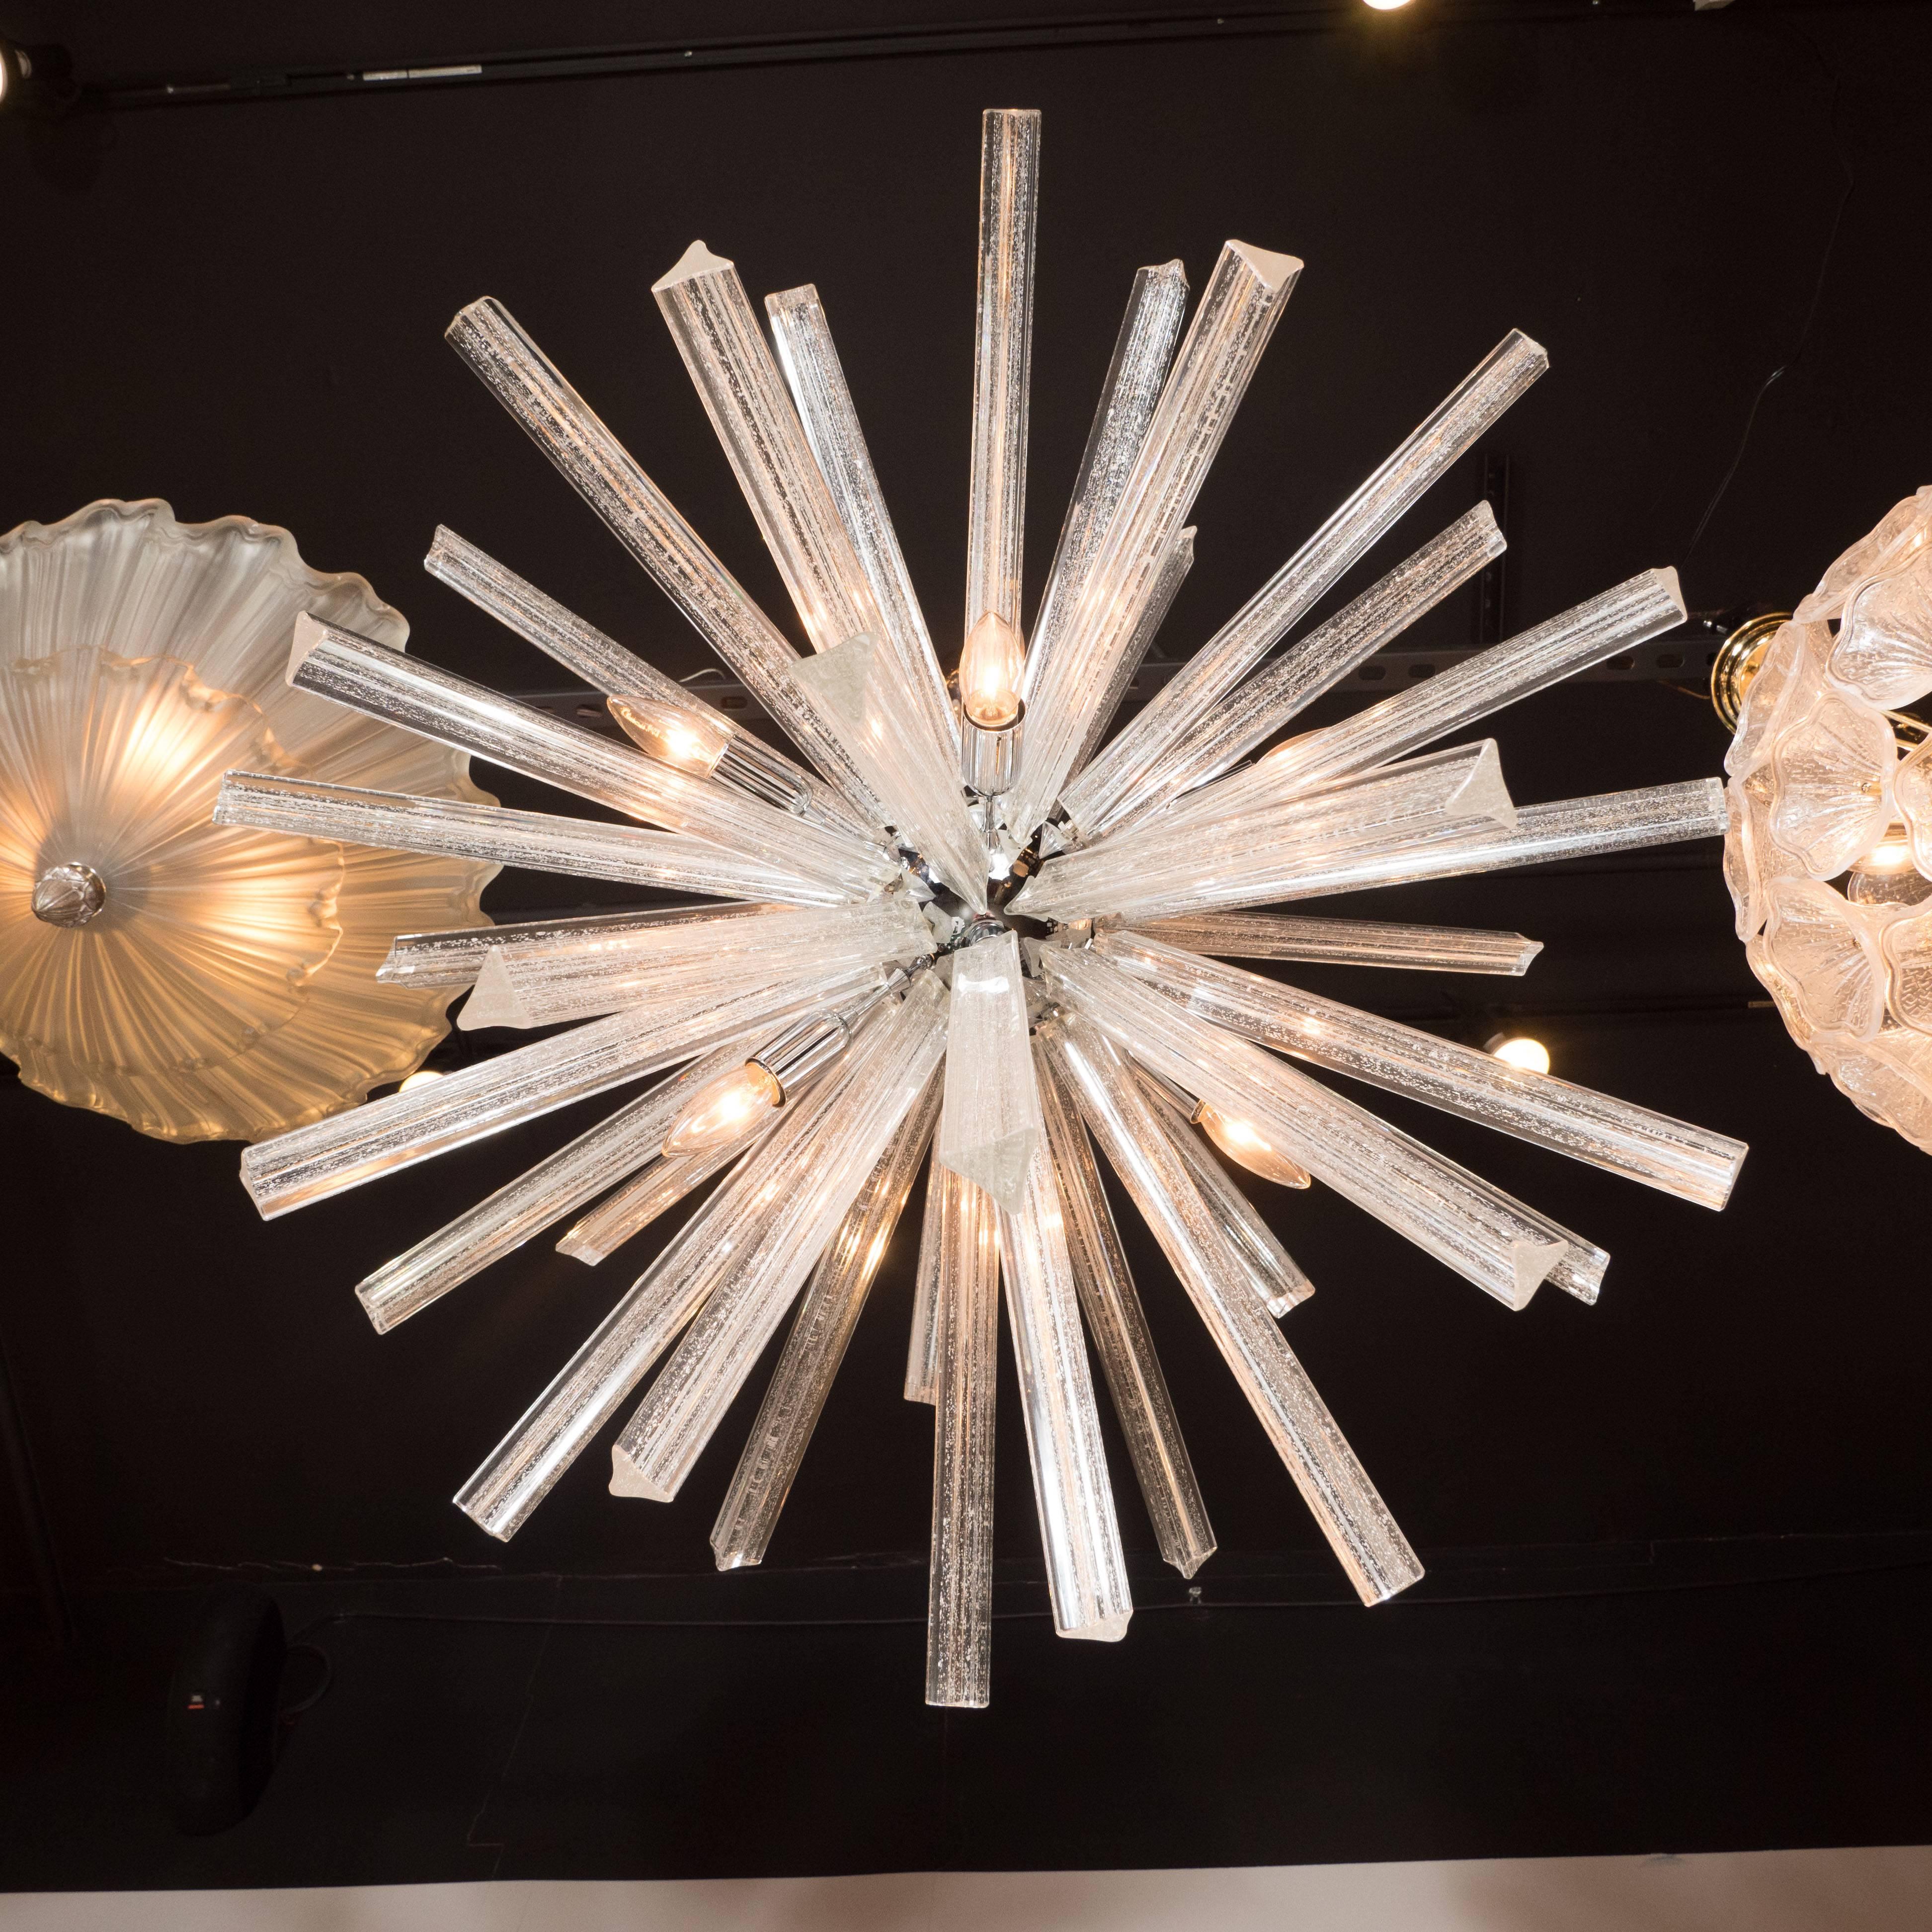 This exquisite handblown Murano glass Sputnik chandelier offers an abundance of Triedre crystals- each replete with a profusion of 24-carat white gold flecks- emanating from a central orb in lustrous chrome. The canopy and chain are also composed of